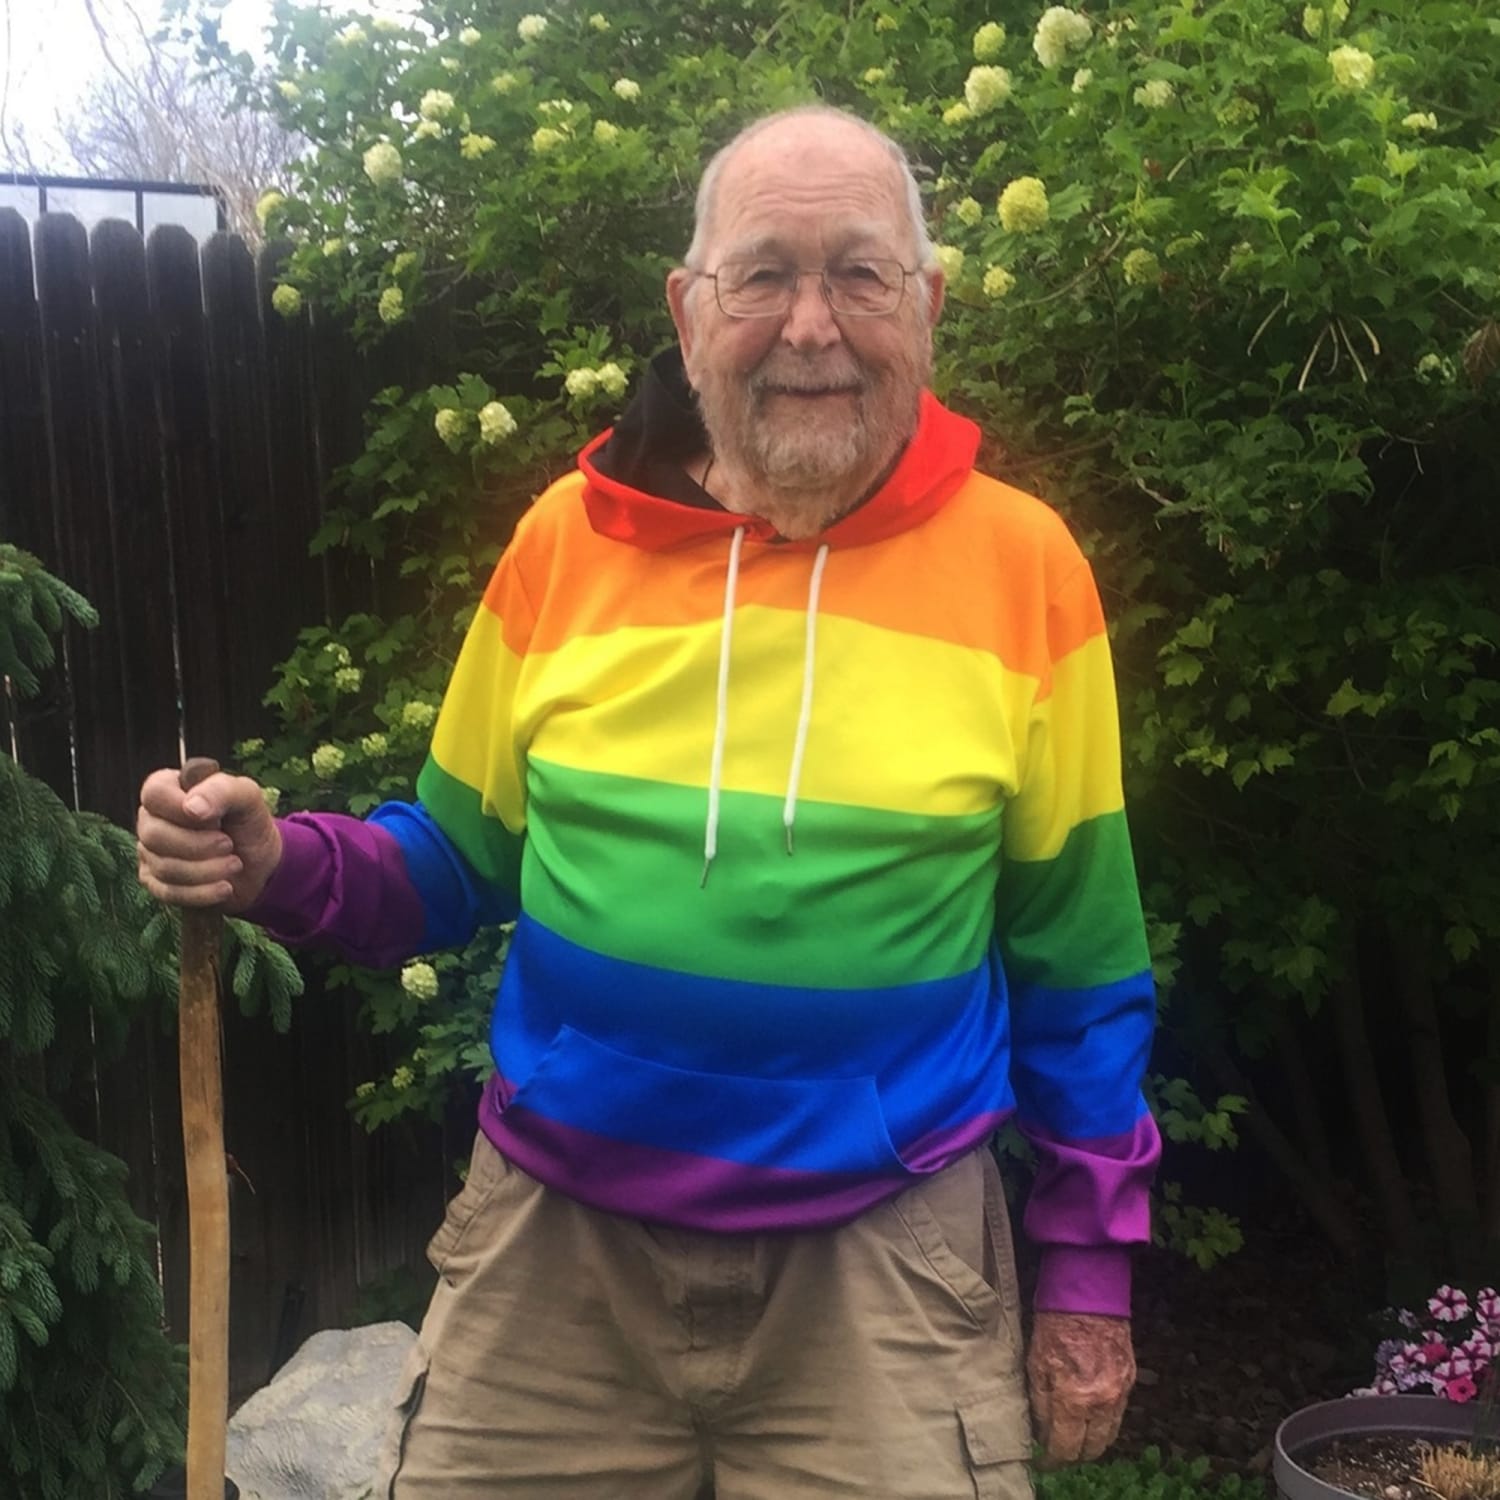 90-year-old grandfather Kenneth Felts comes out as gay